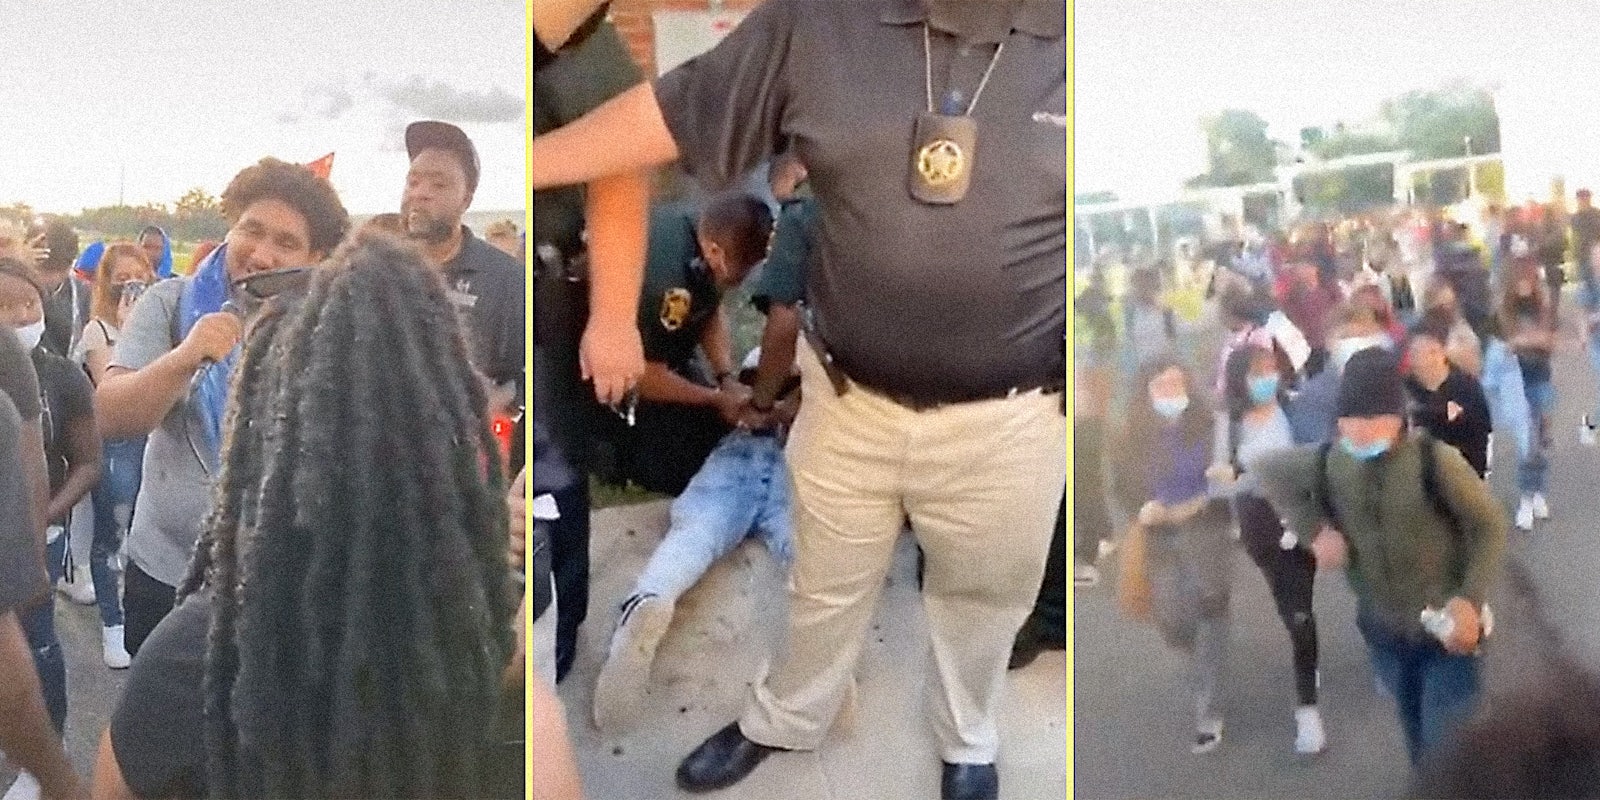 Kids at a rally (L), cops arresting a kid (C), and kids marching together (R).